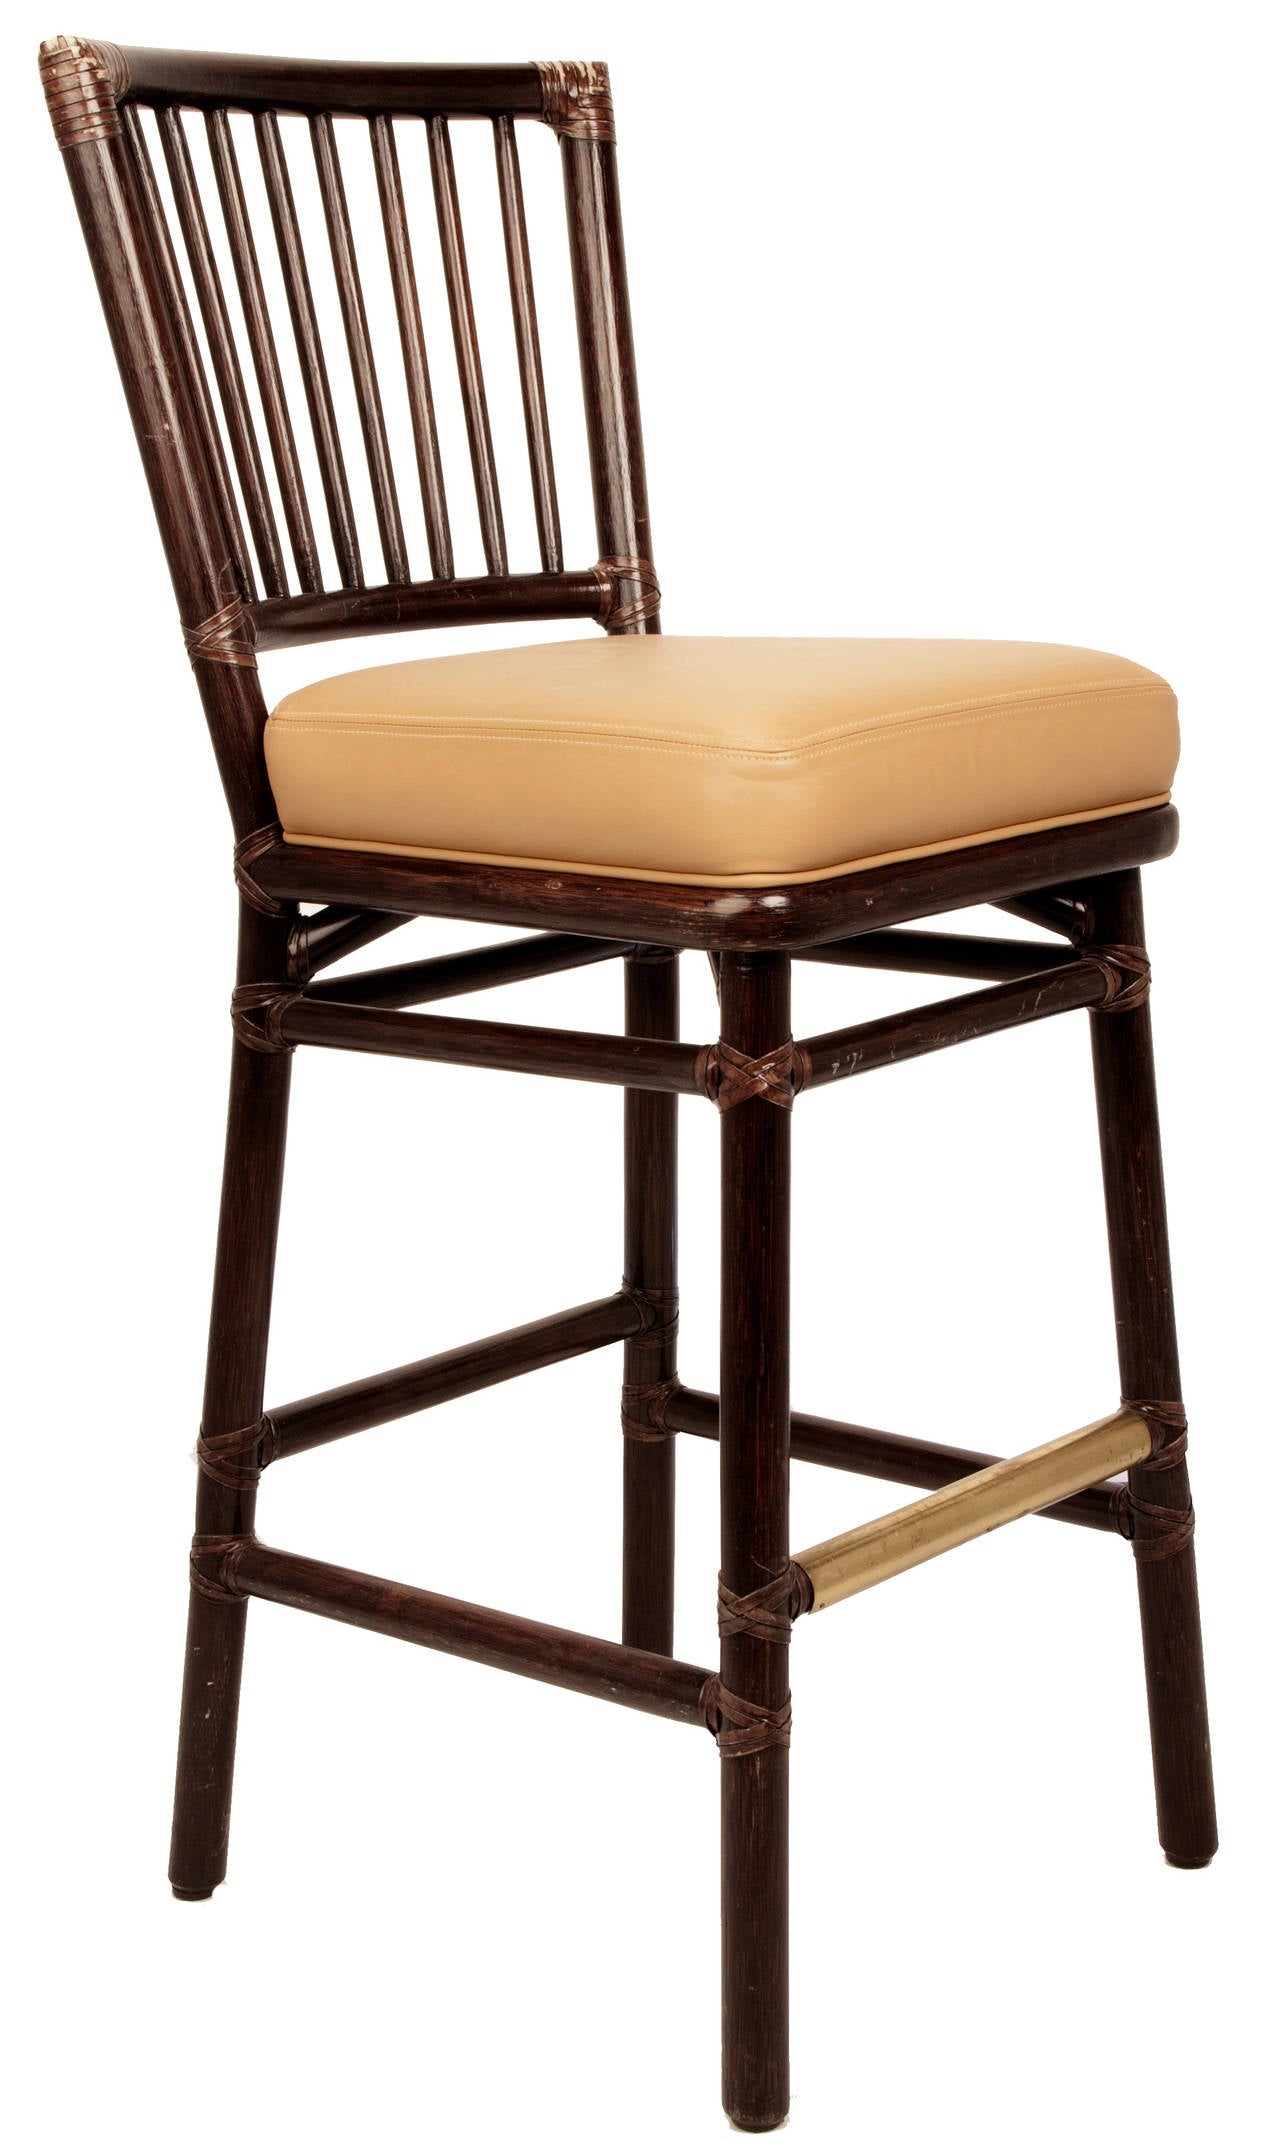 These McGuire bar stools with rattan frames and typical leather wrapped joinery, the backs have vertical spindles, the foot rail is covered in brass and the seats are upholstered in wheat colored leather with a self welt